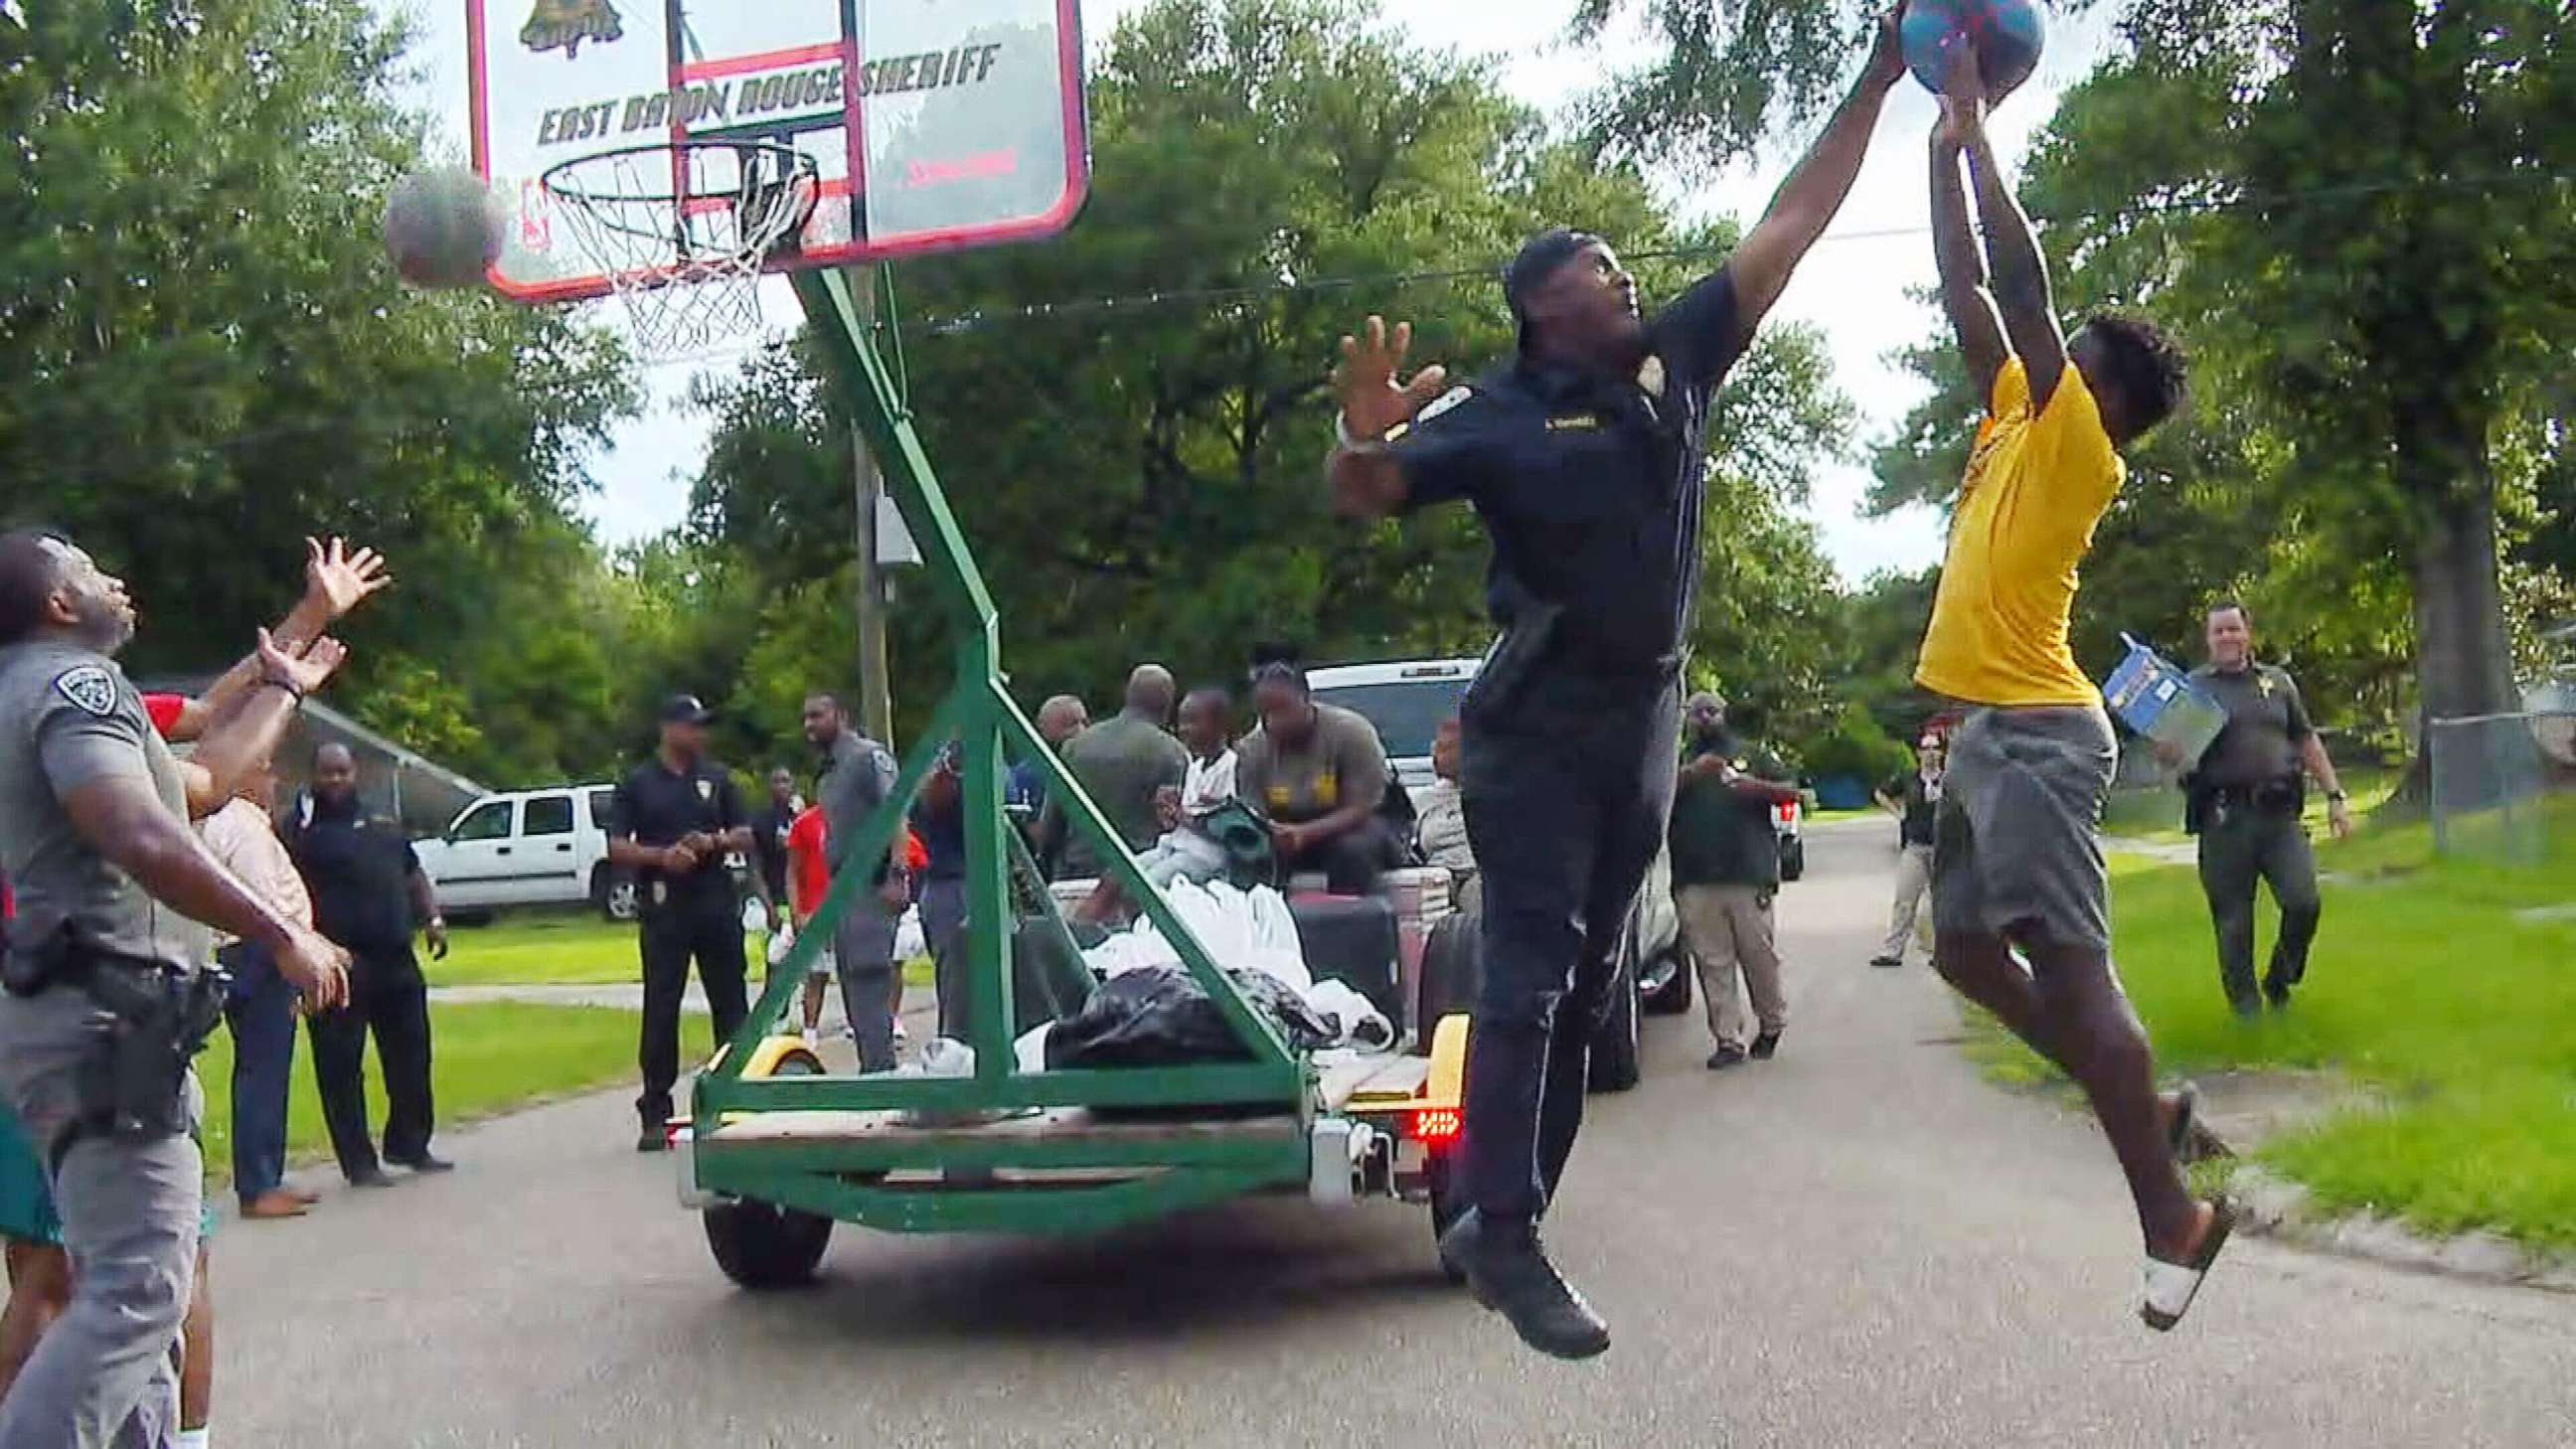 PHOTO: Police and Sheriff’s office personnel bring basketball and music to the community in order to build relationships of trust in East Baton Rouge Parish, La., June 28, 2021.